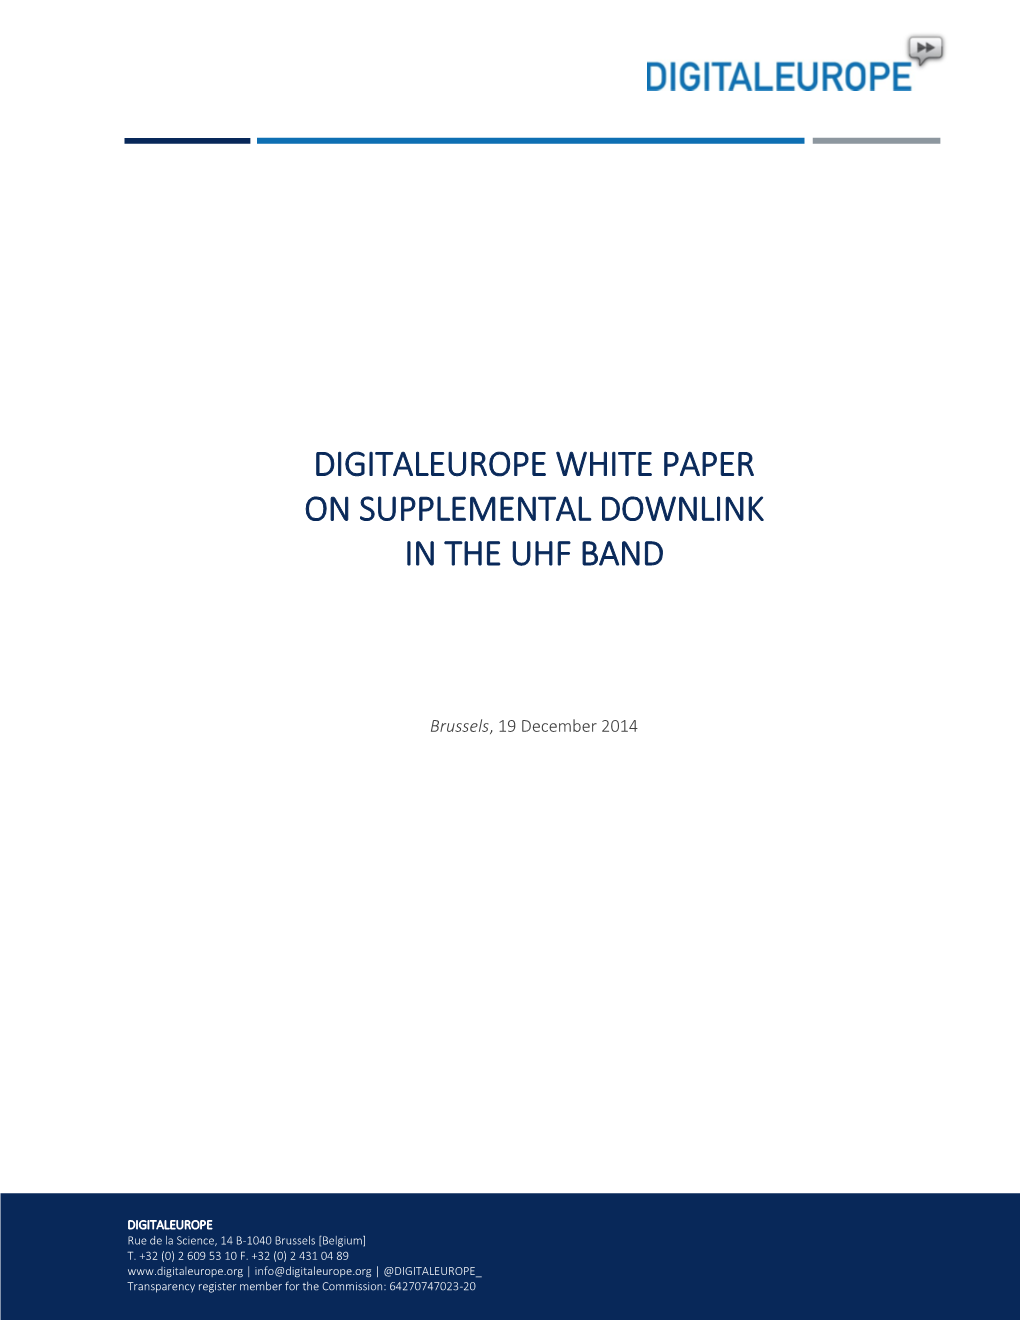 Digitaleurope White Paper on Supplemental Downlink in the Uhf Band